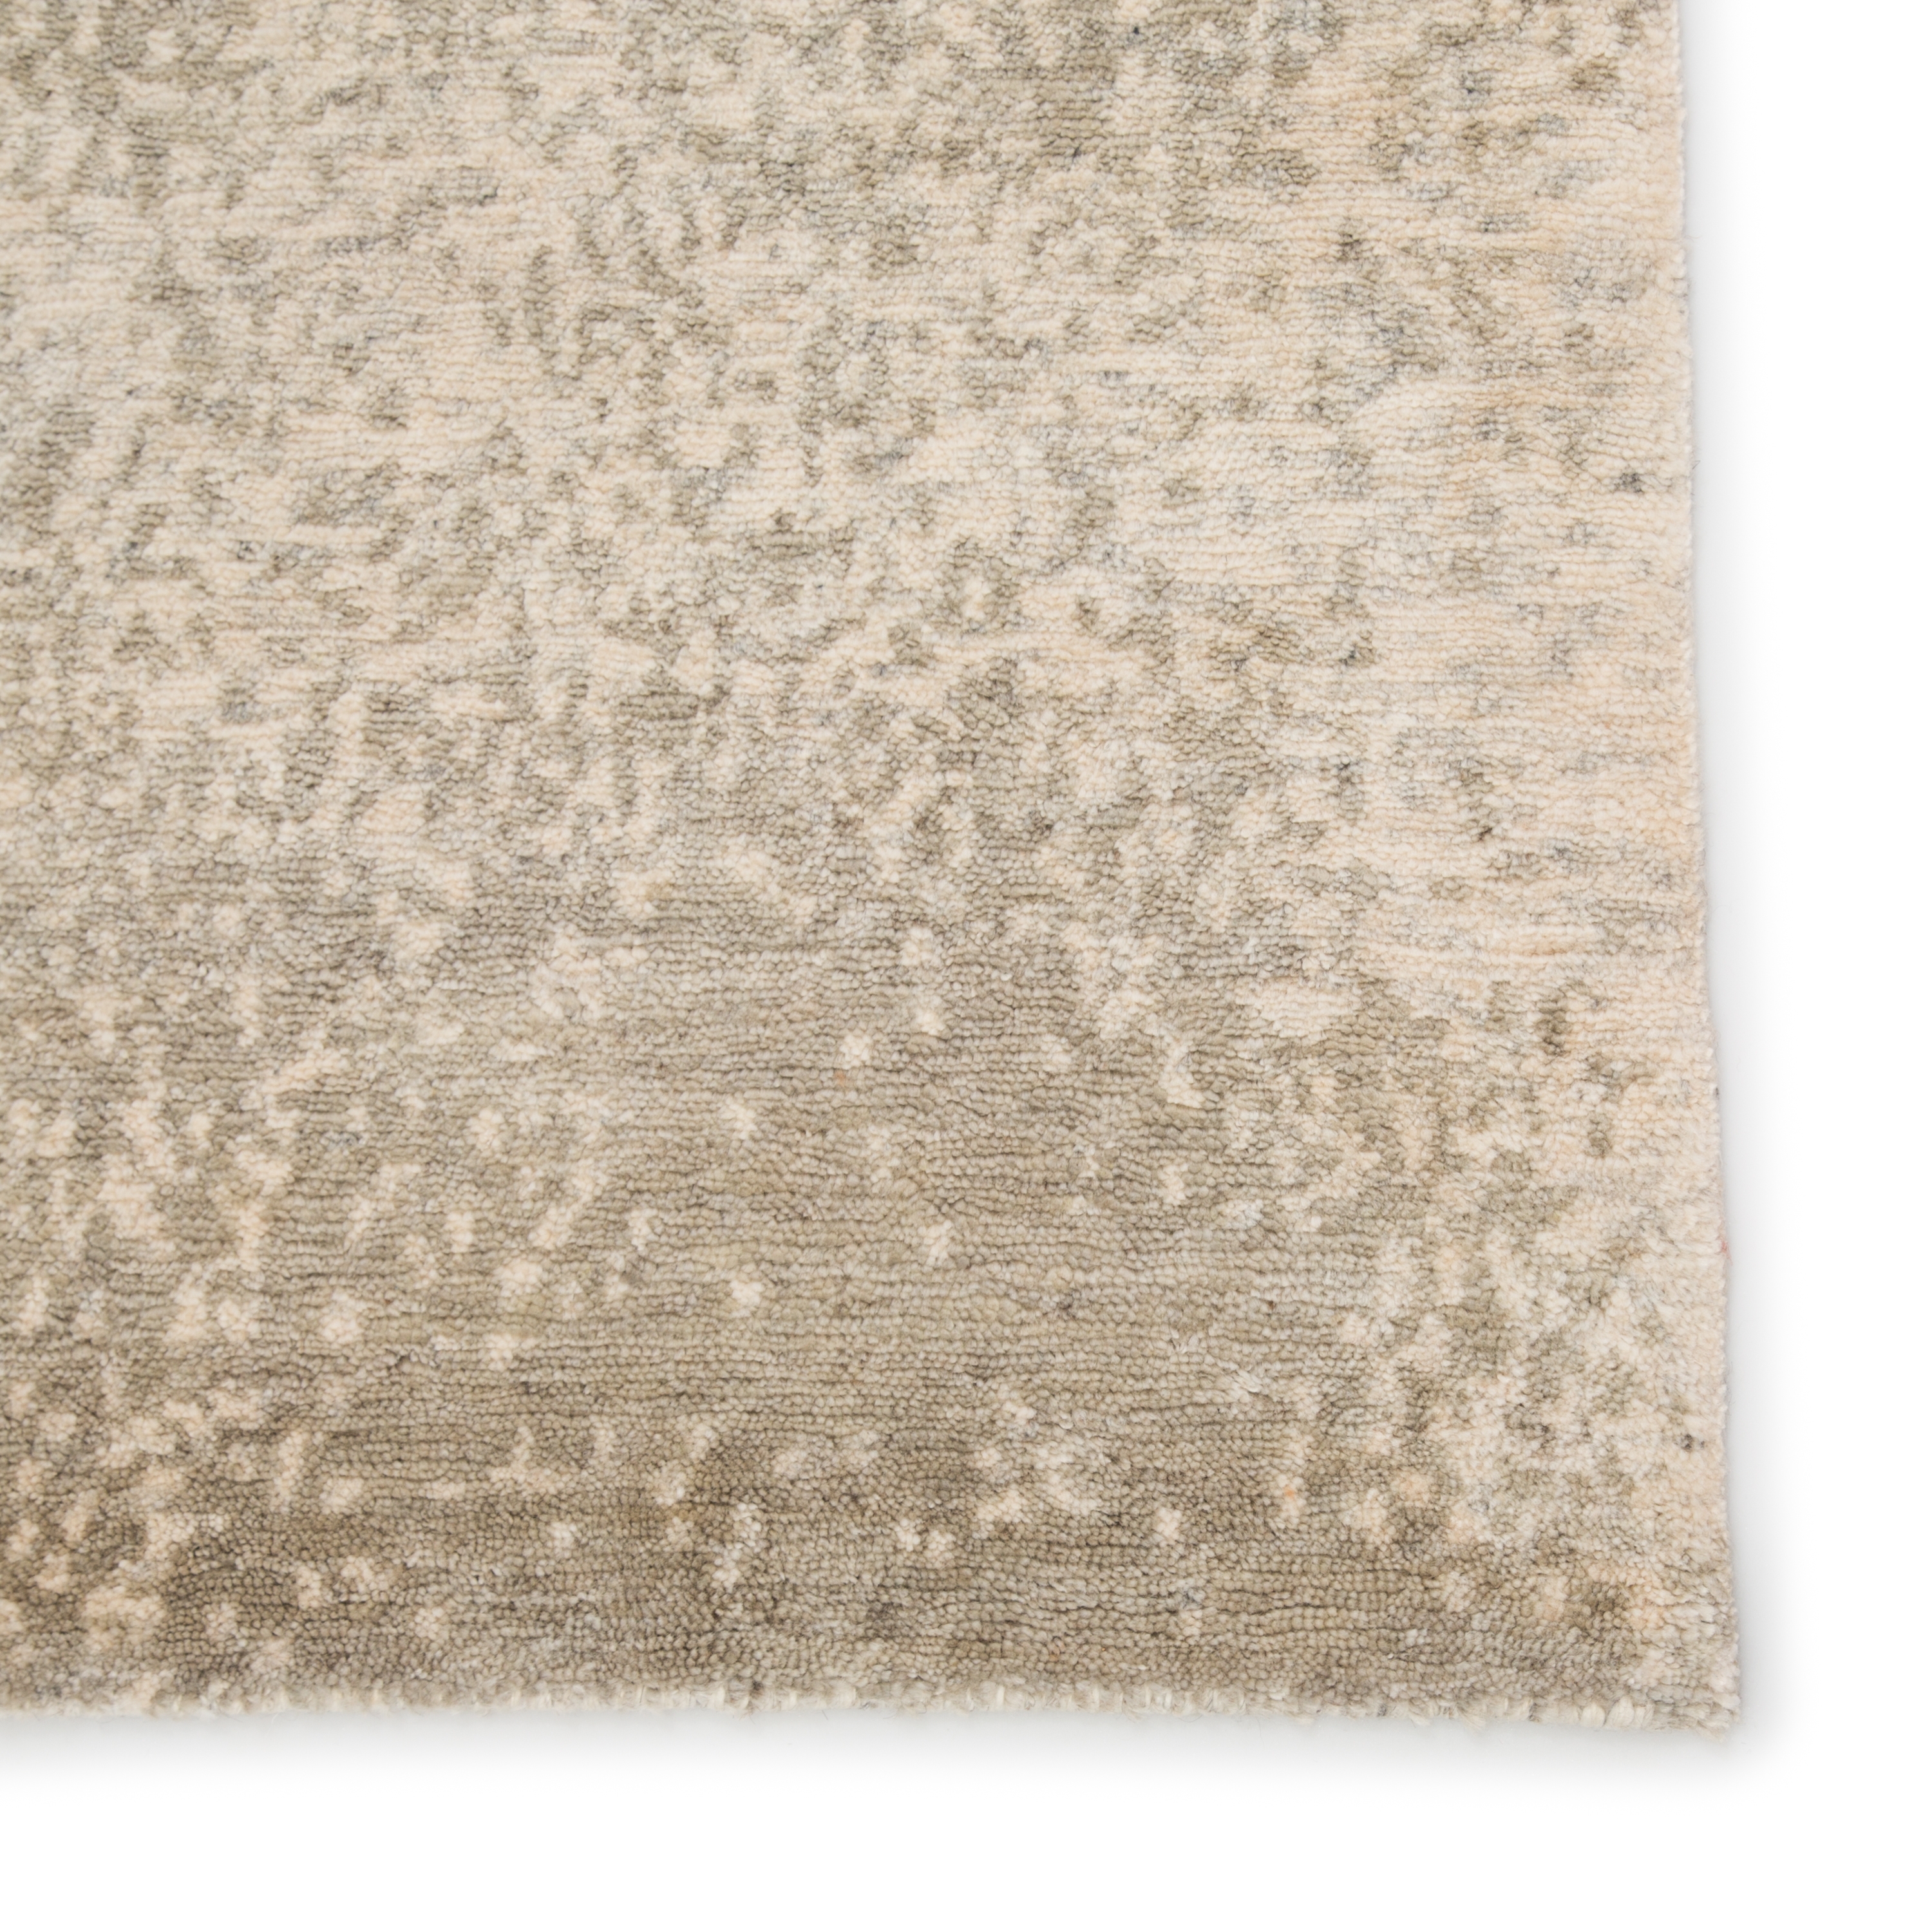 Zoe Bios Creative by Mignonne Hand-Knotted Abstract Gold/ Gray Area Rug (5'X8') - Image 3